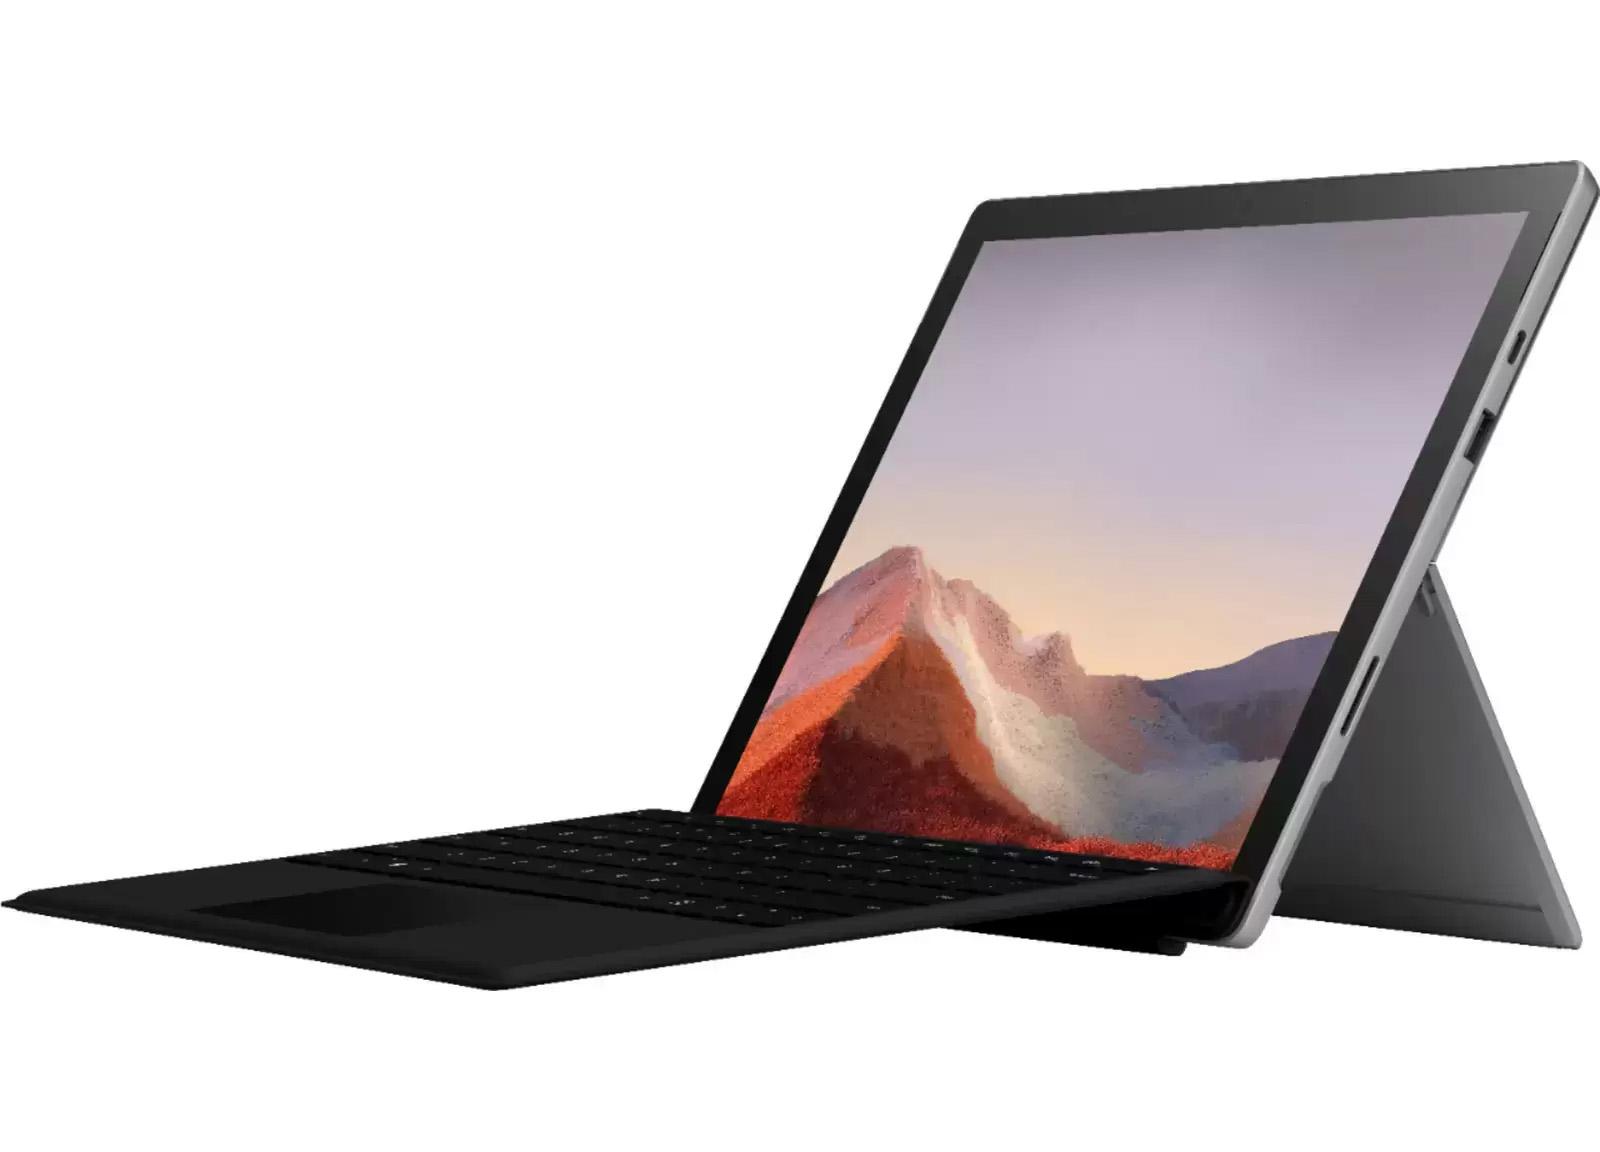 Microsoft Surface Pro 7 12.3in i5 8GB 128GB + Black Cover for $649 Shipped